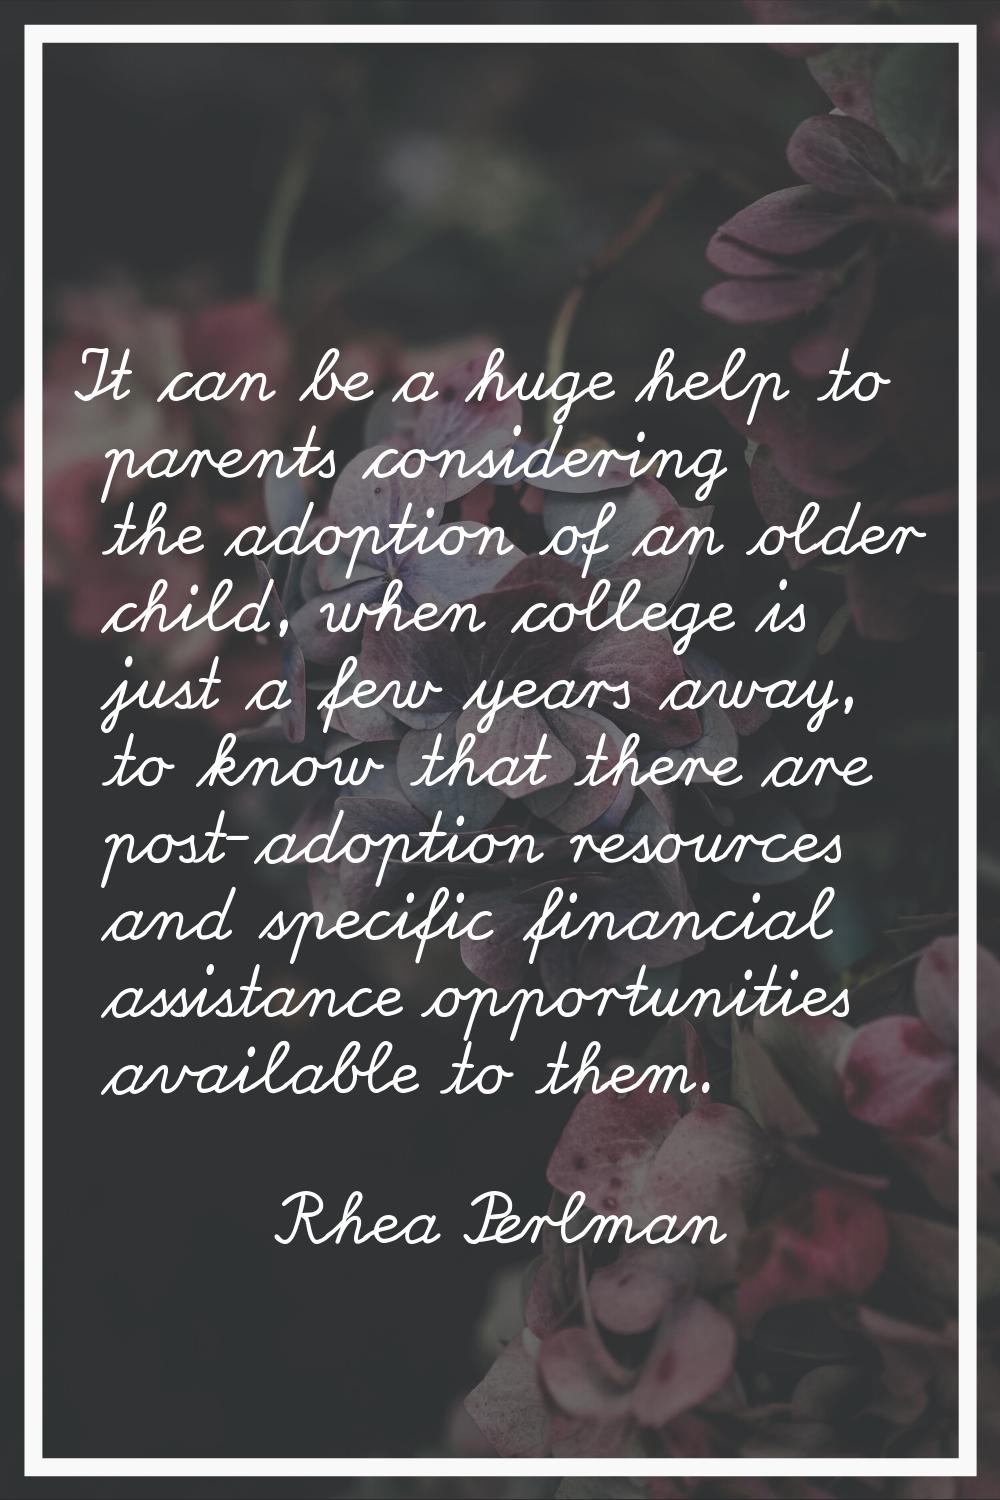 It can be a huge help to parents considering the adoption of an older child, when college is just a